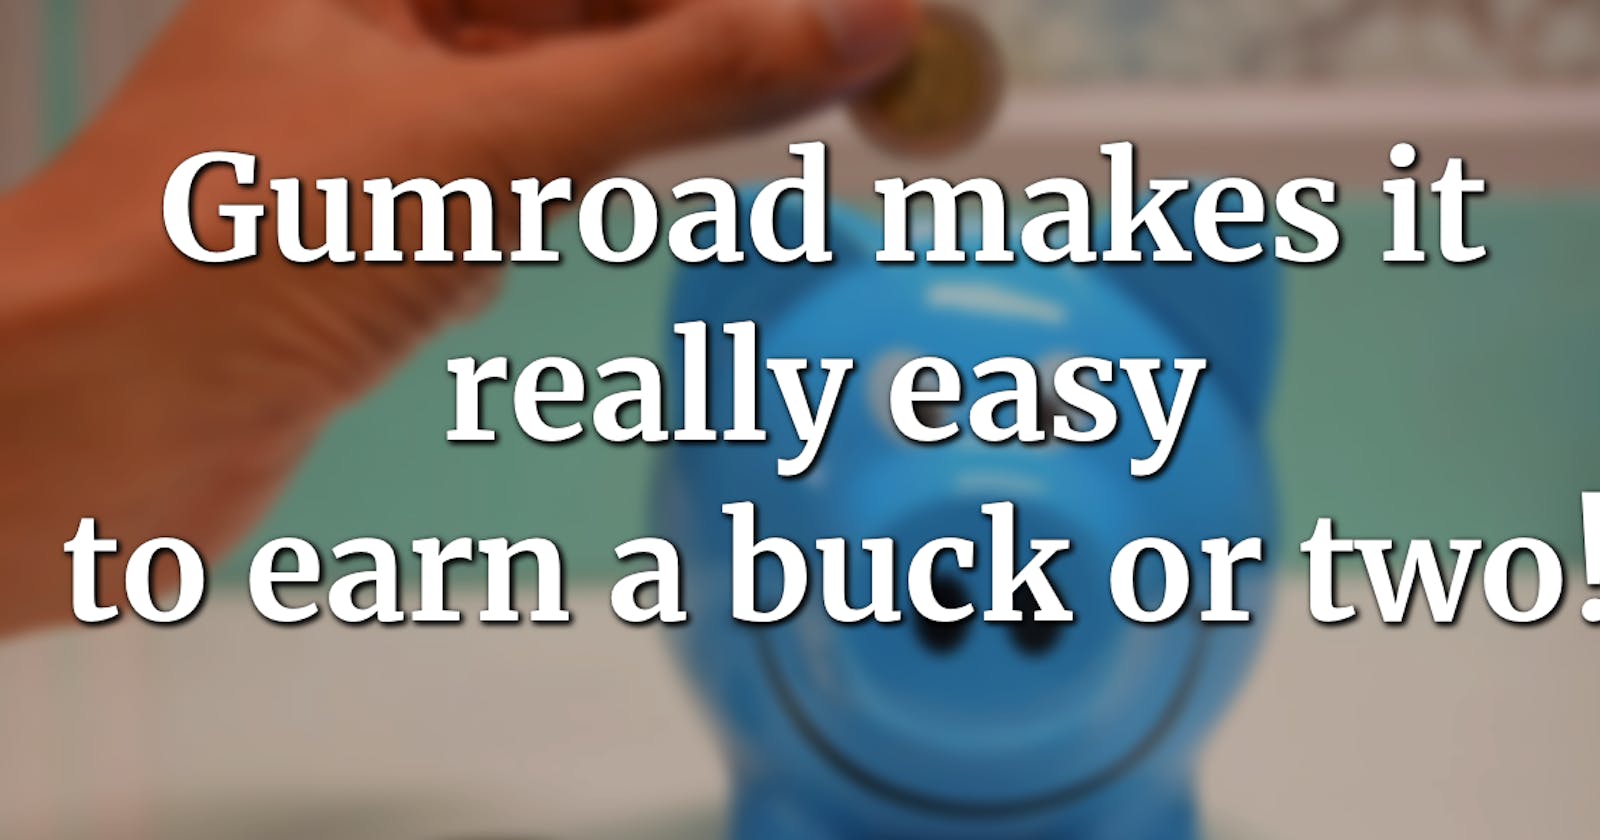 Gumroad makes it really easy to earn a buck or two!